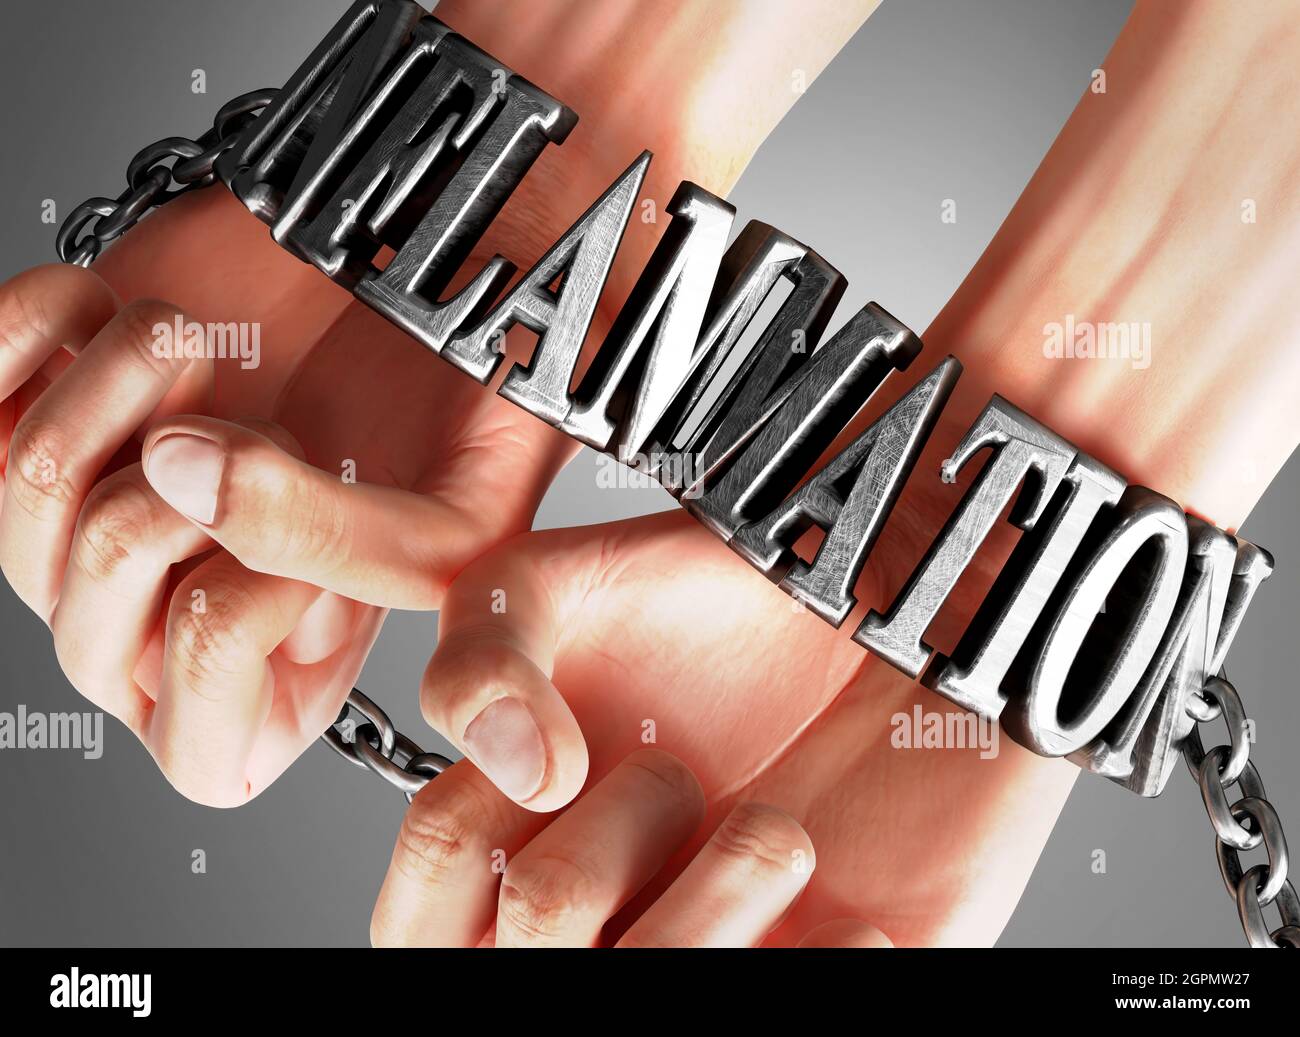 Social impact and influence of inflammation - analogy showing human hands in chains with a word inflammation as a symbol of its burden and misery it b Stock Photo